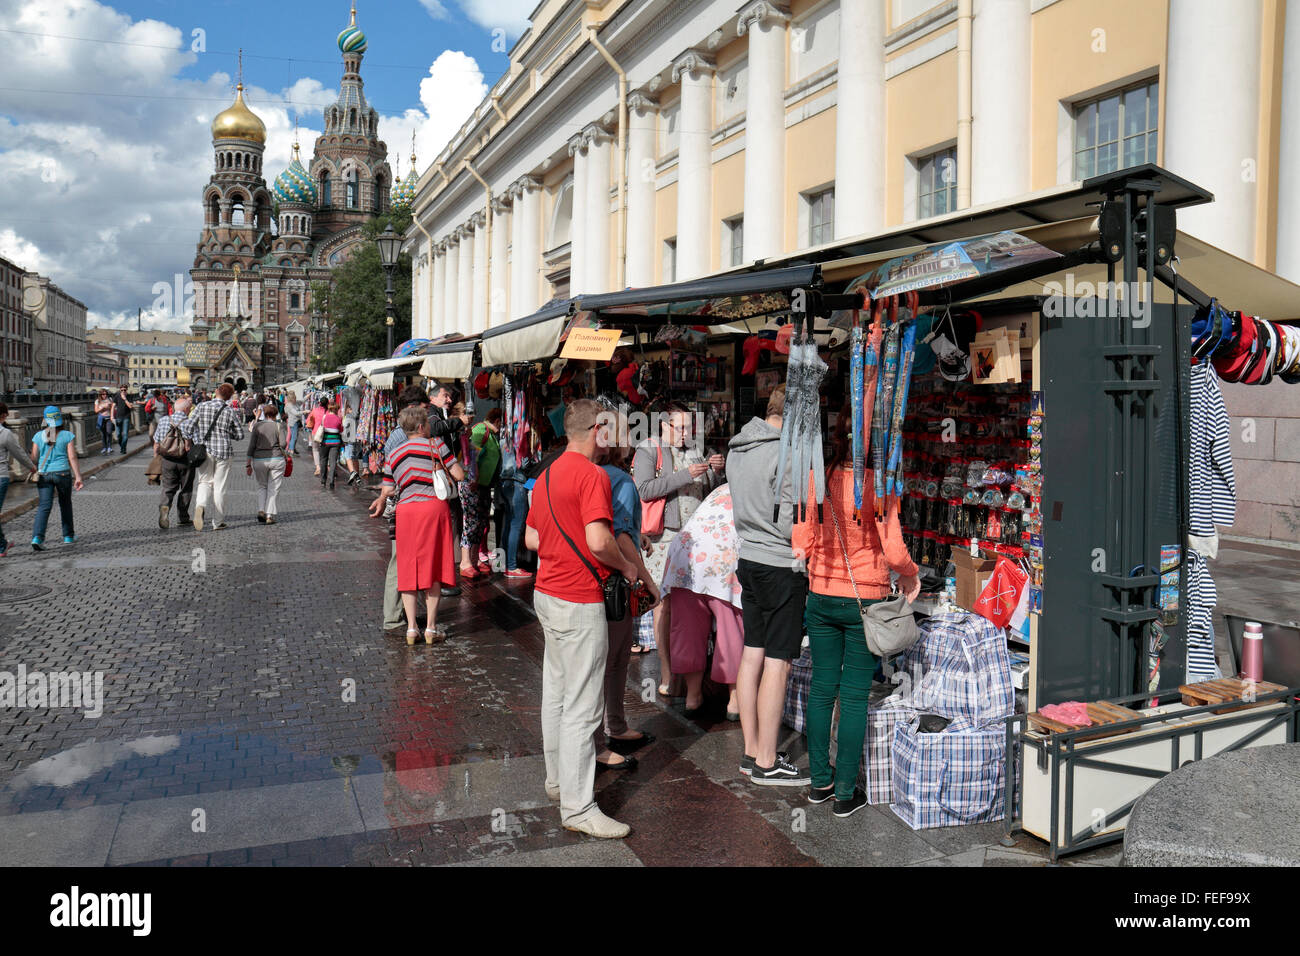 Market stalls selling with tourist souvenirs close to the Church of the Savior on the Spilled Blood in St Petersburg, Russia. Stock Photo